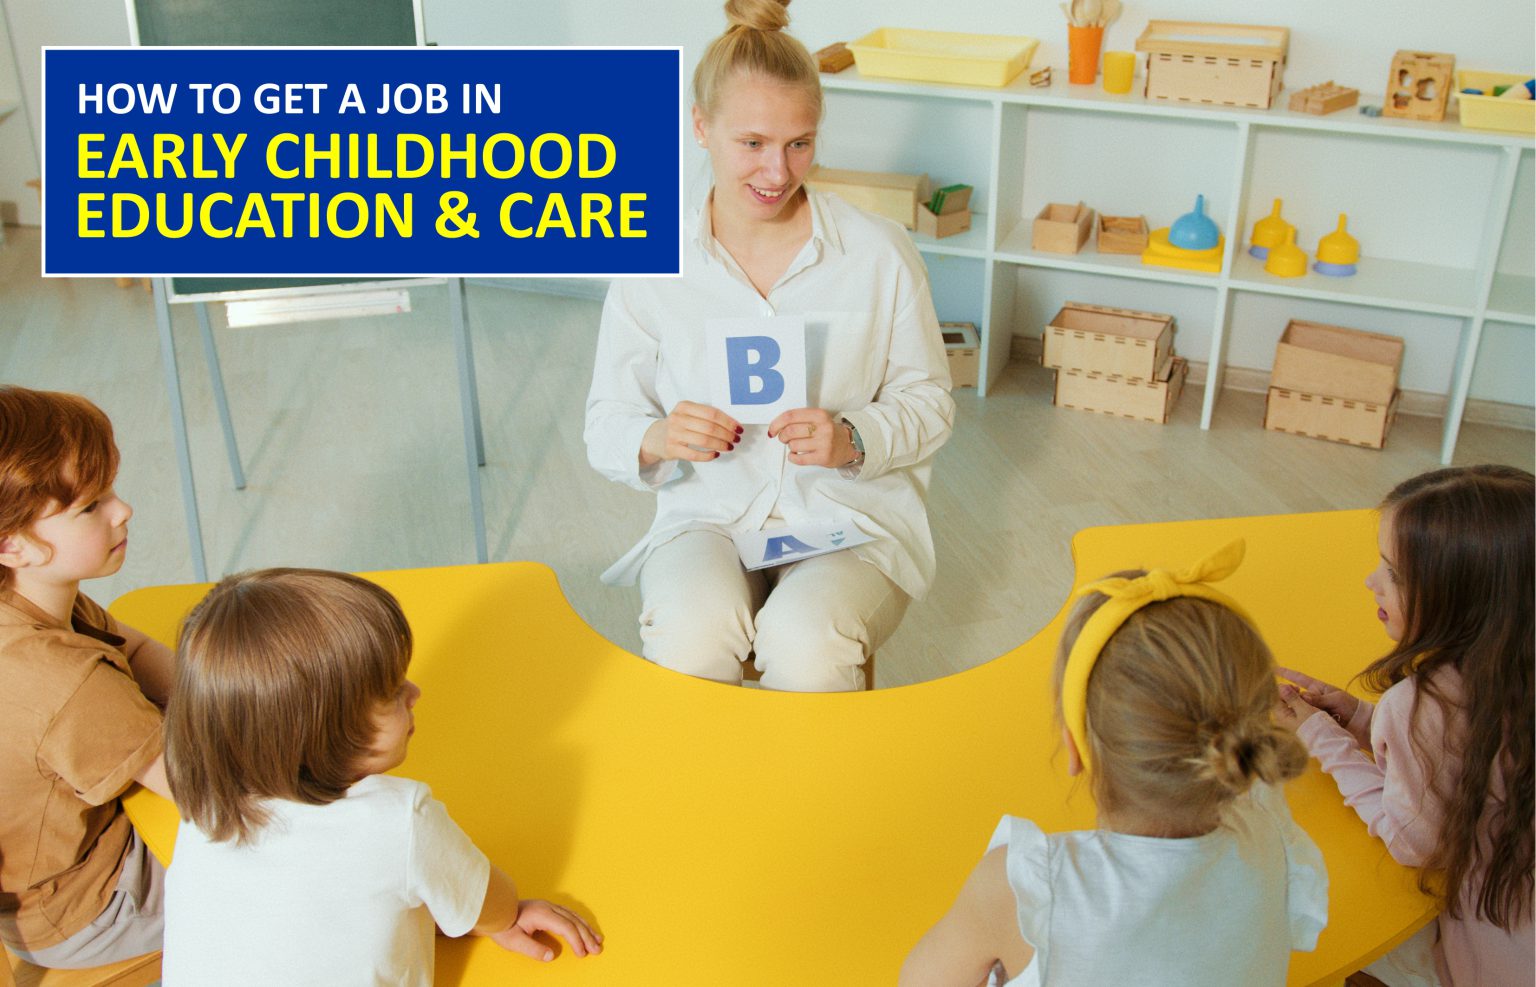 how-to-get-a-job-in-early-childhood-education-care-ihna-blog